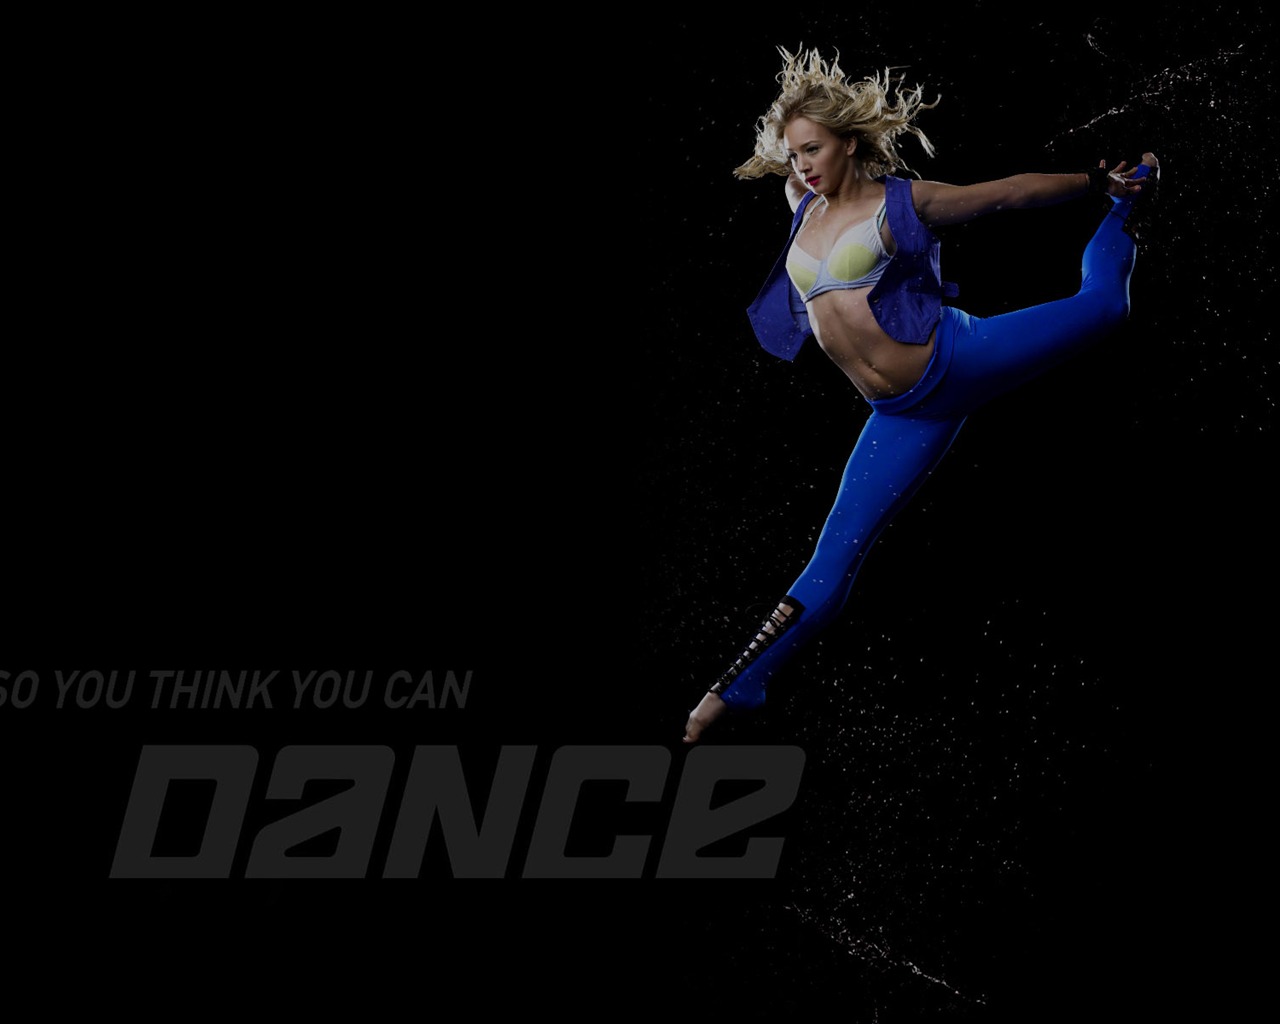 So You Think You Can Dance 舞林争霸 壁纸(二)19 - 1280x1024